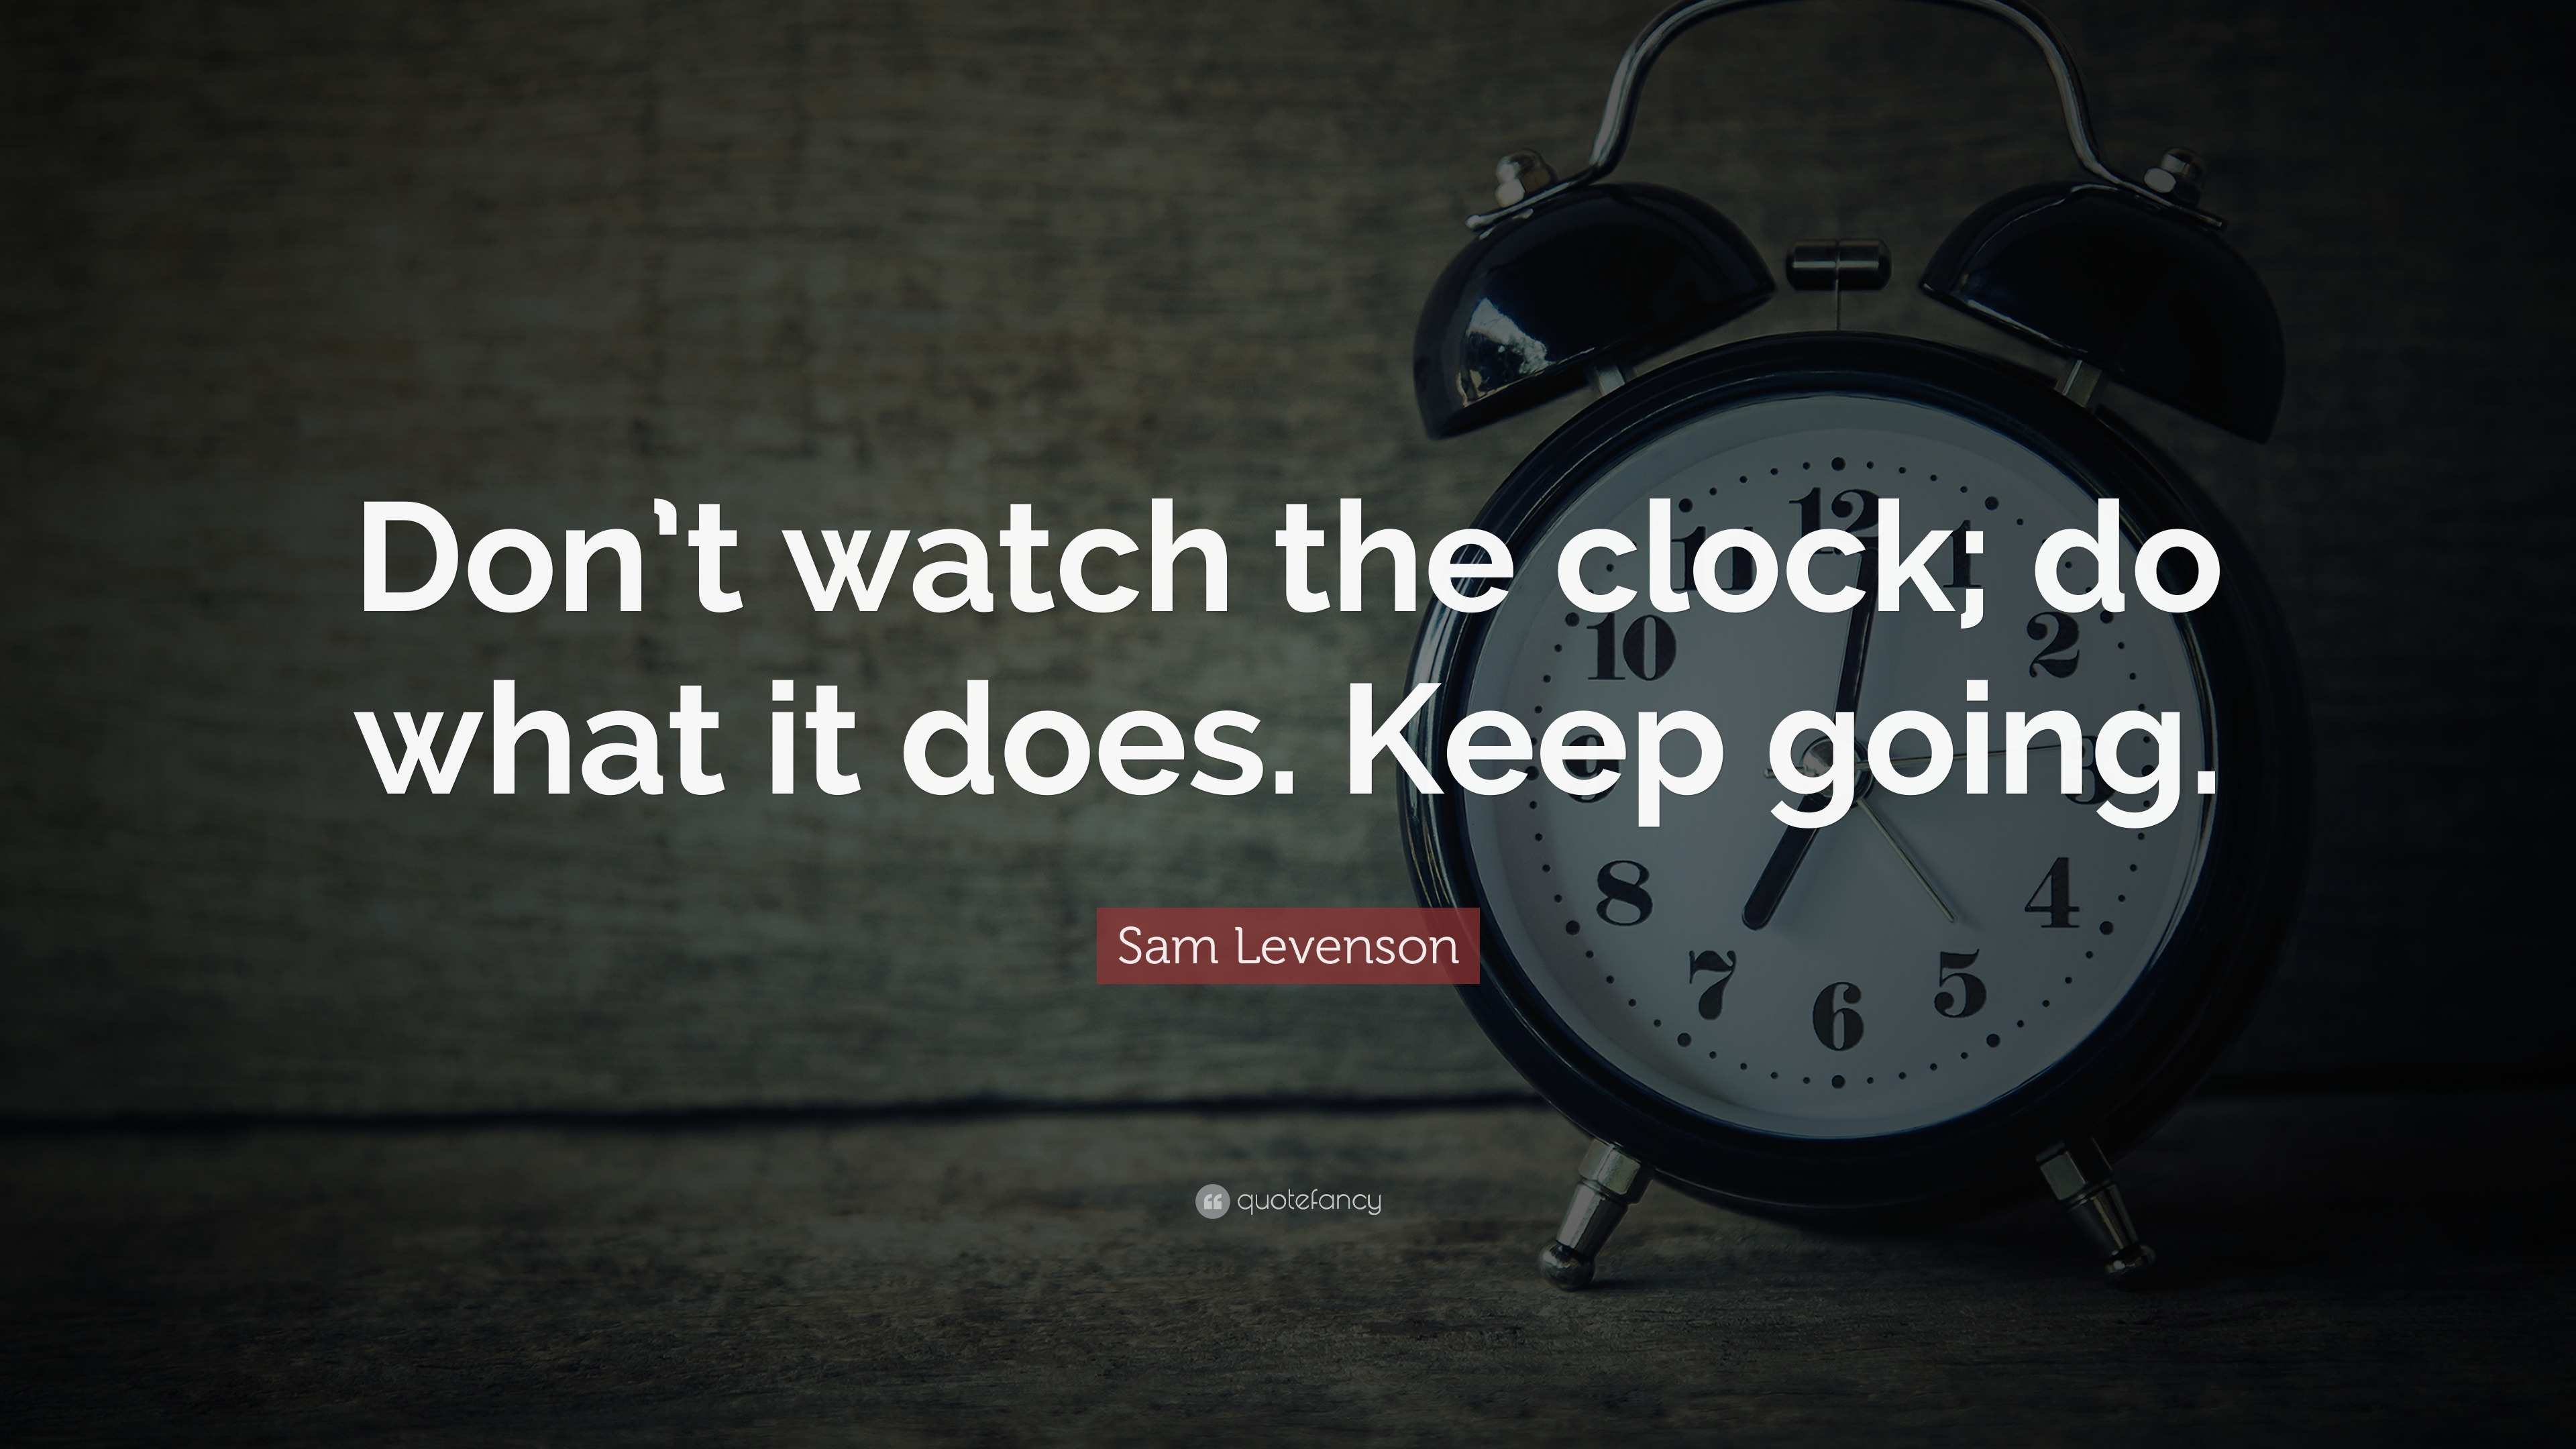 Time Quotes (40 wallpapers) - Quotefancy